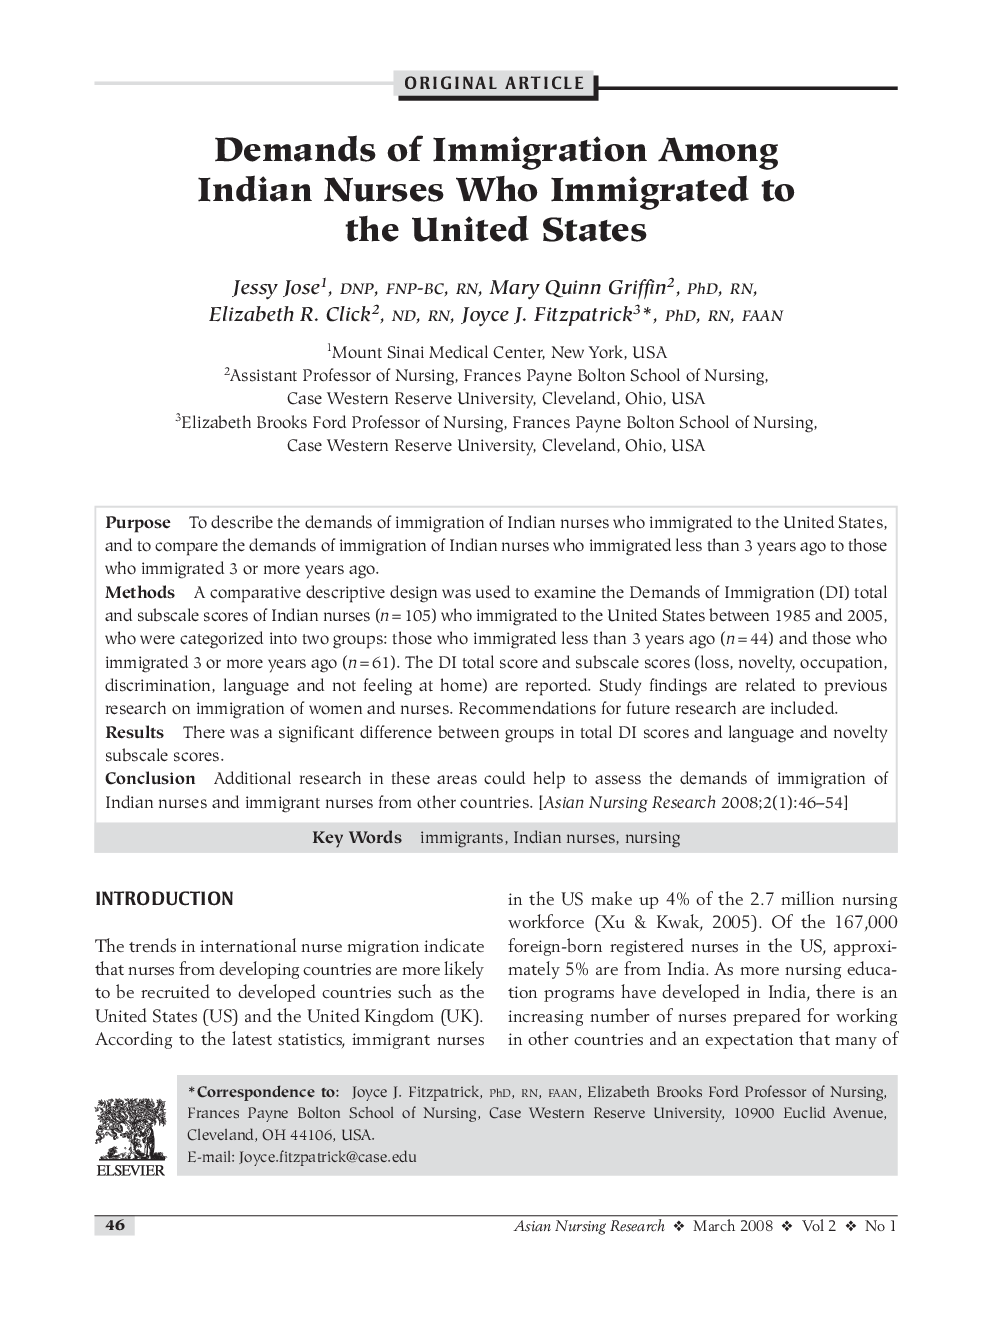 Demands of Immigration Among Indian Nurses Who Immigrated to the United States